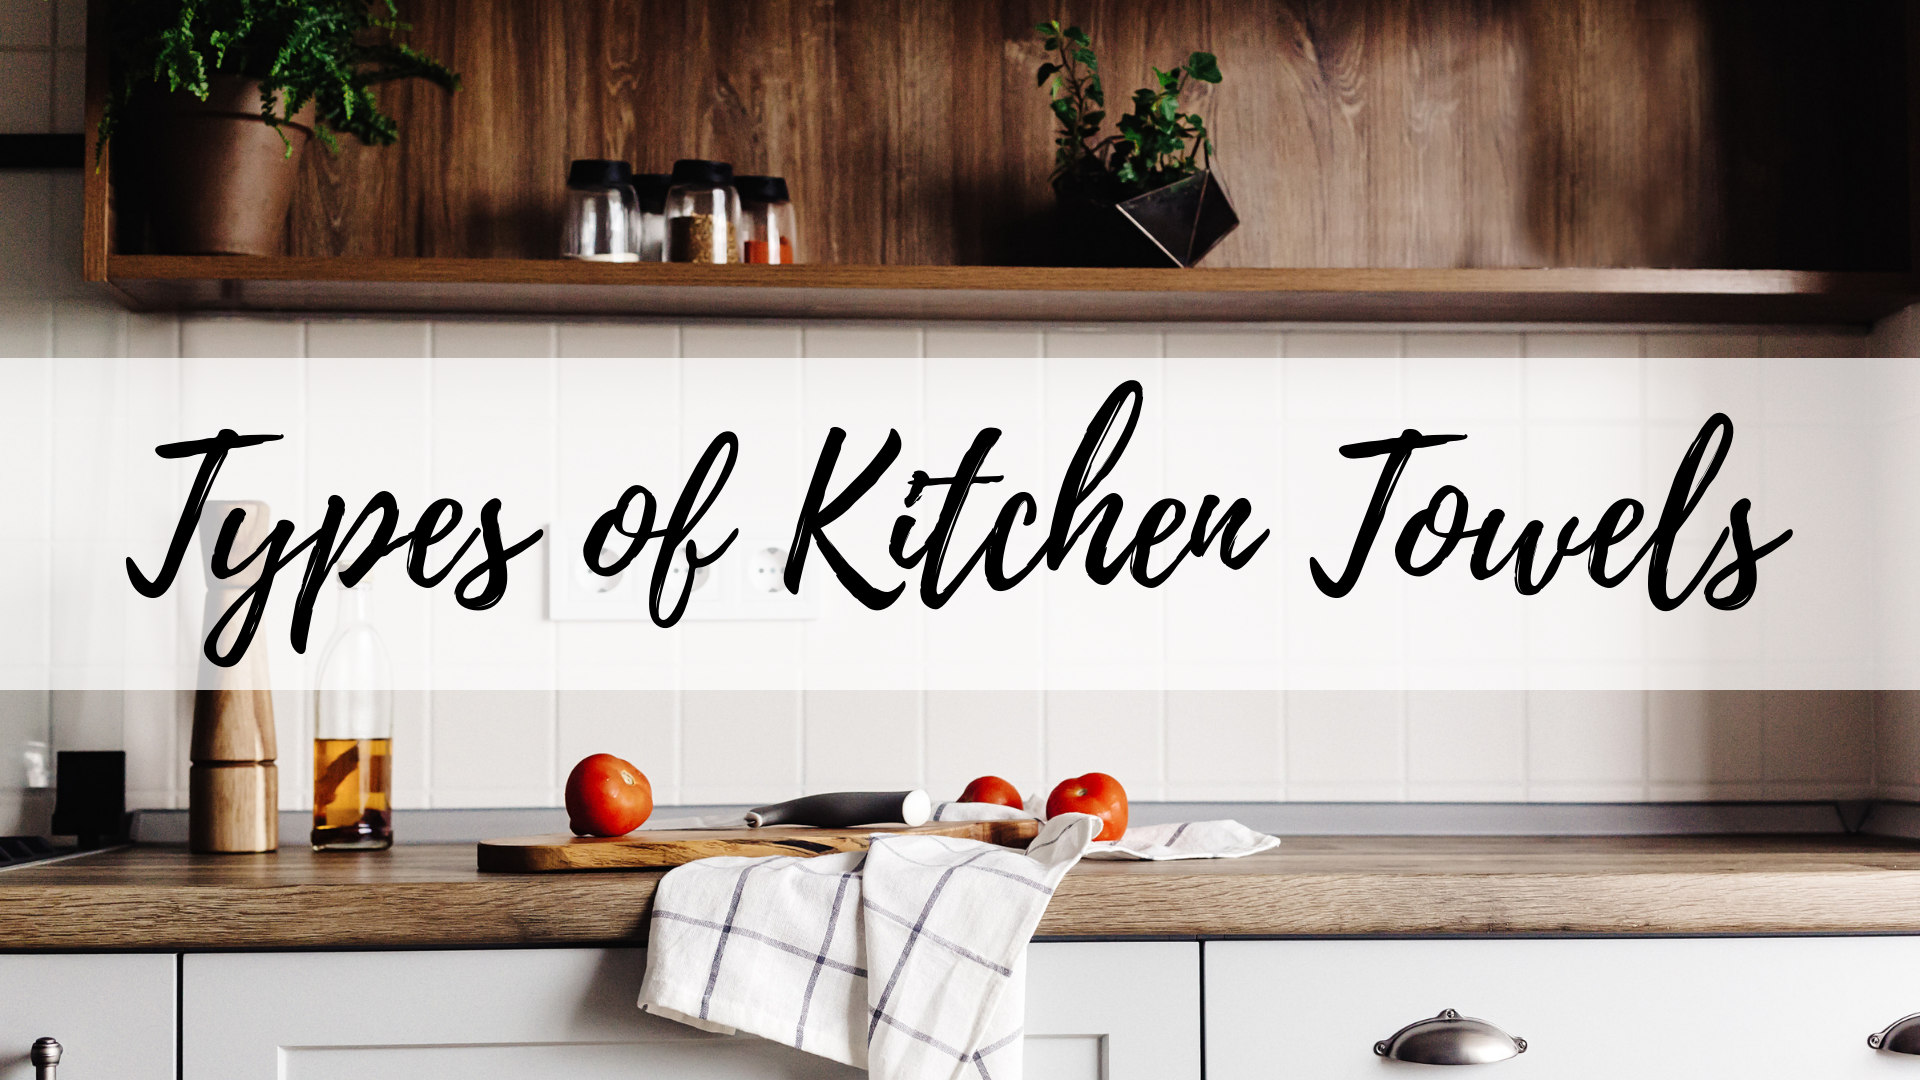 kitchen toweling